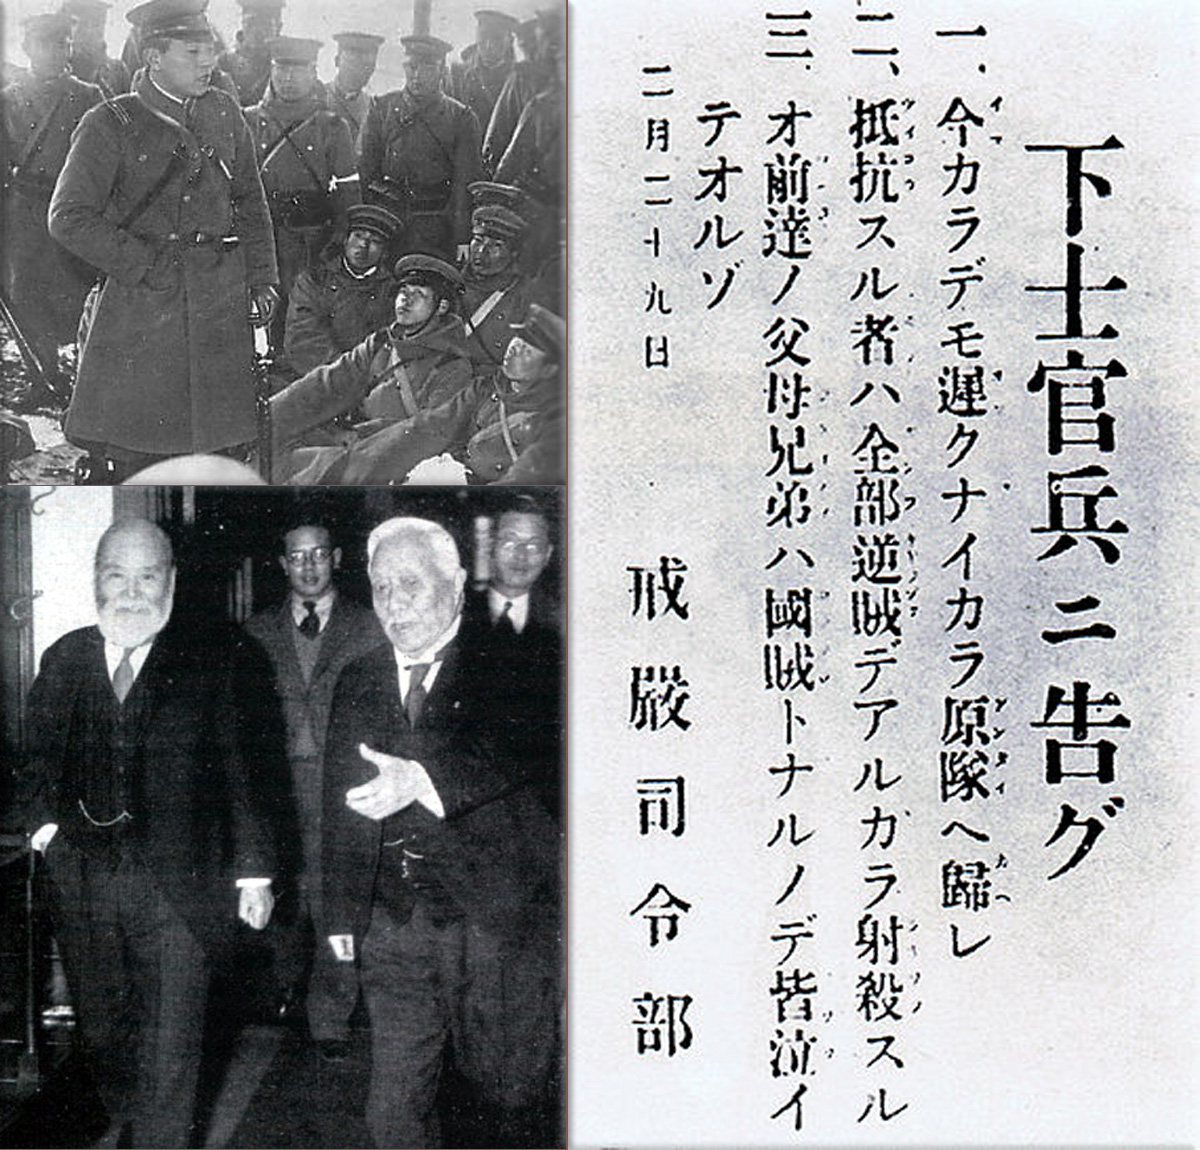 February 26 Incident: young Japanese military officers attempt to stage a coup against the government